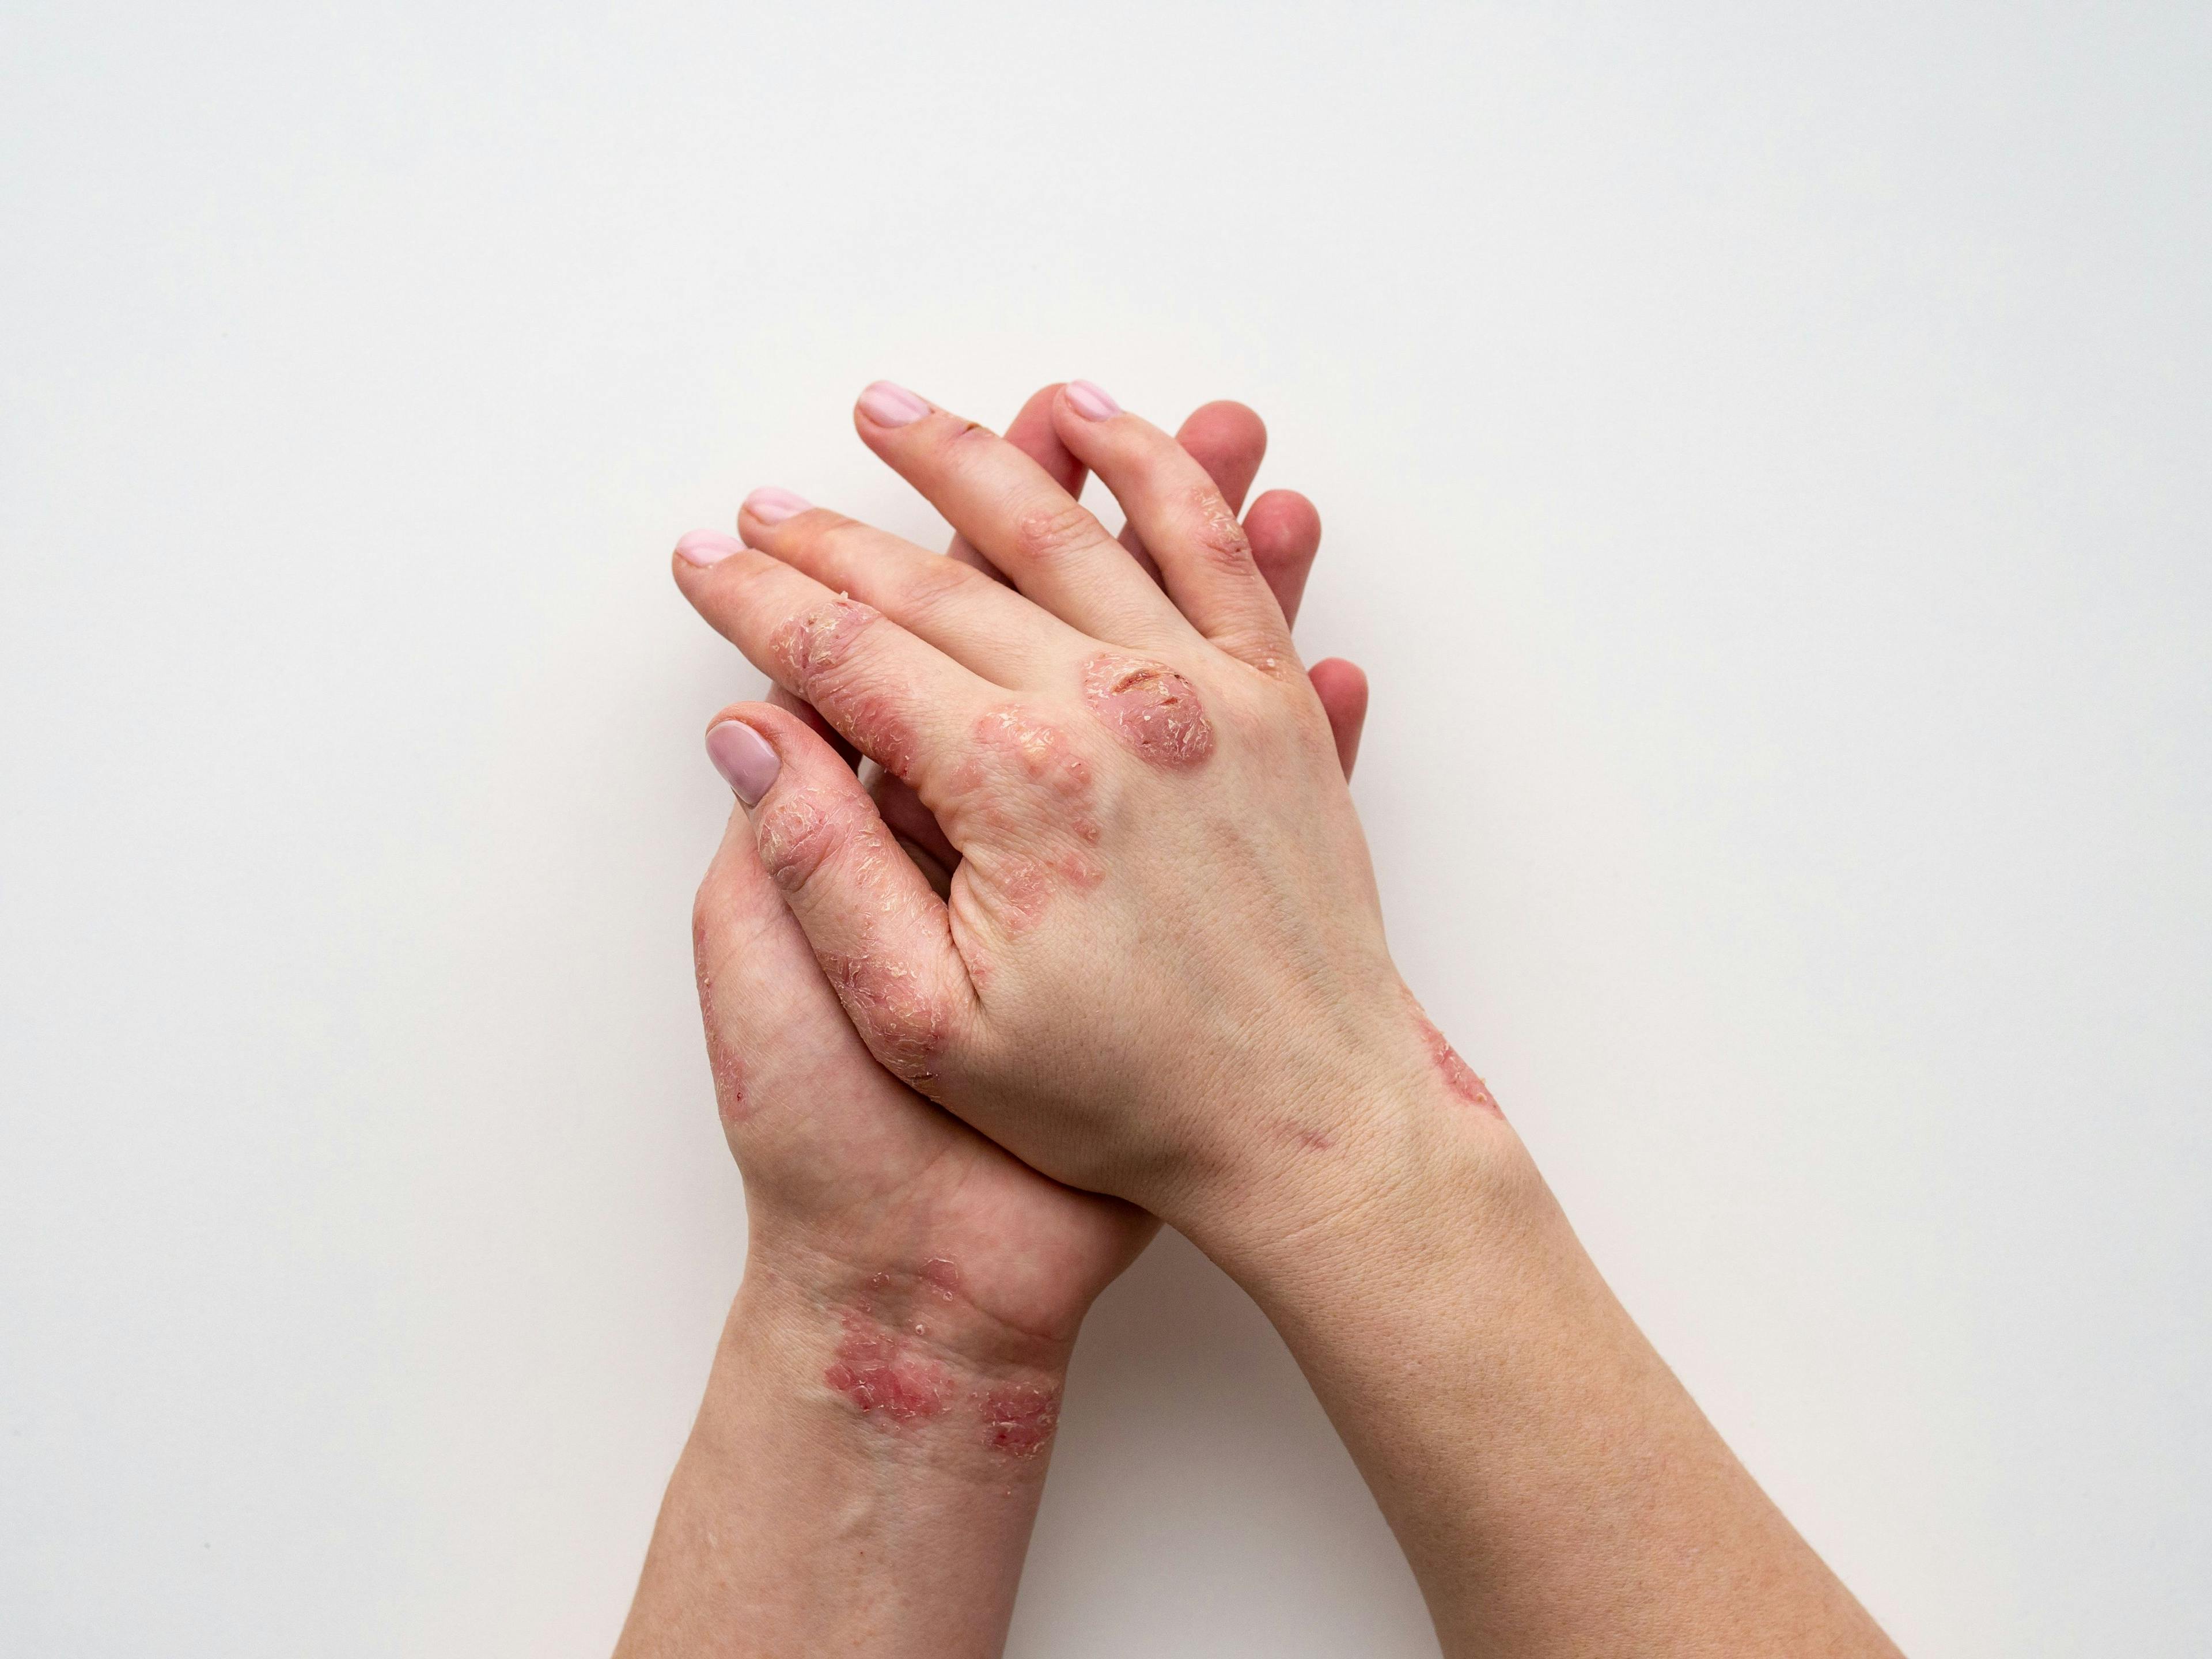 Effect of Joint Pain on Analgesic Use in Patients with Psoriasis